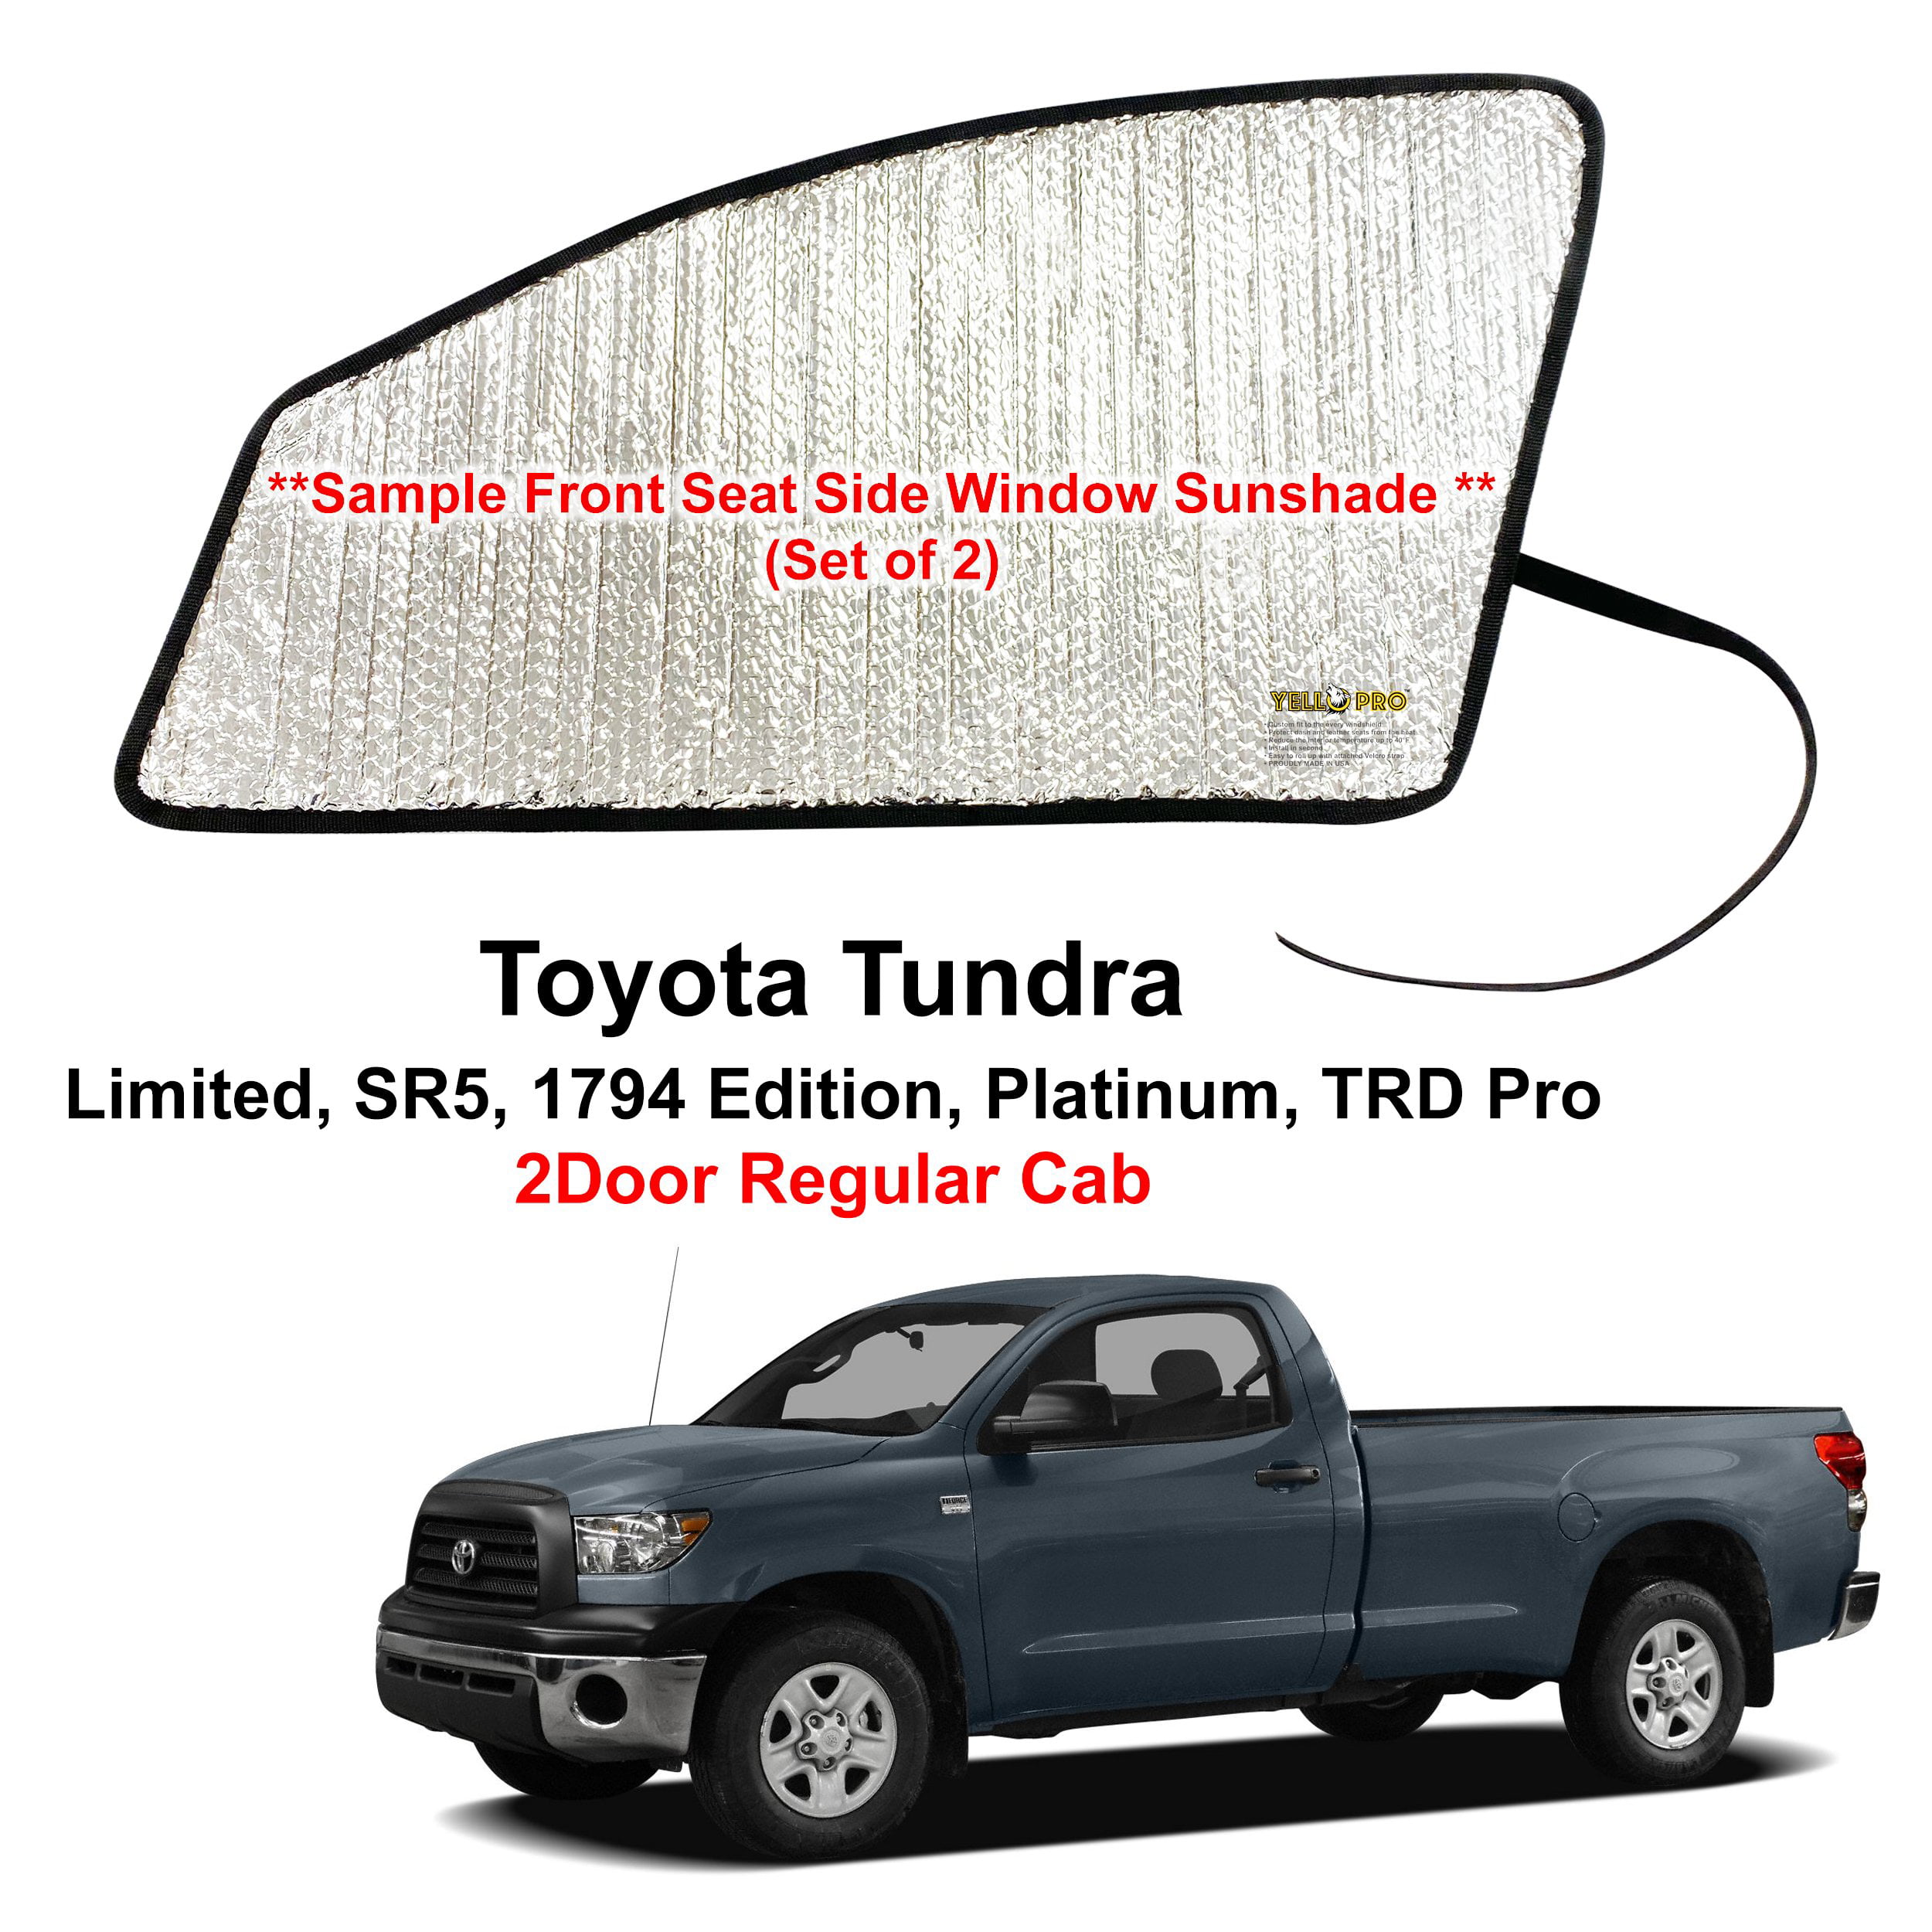 Custom Fit Windshield Sunshade for Toyota Tundra 1999 to 2006 std cab andx-cab 